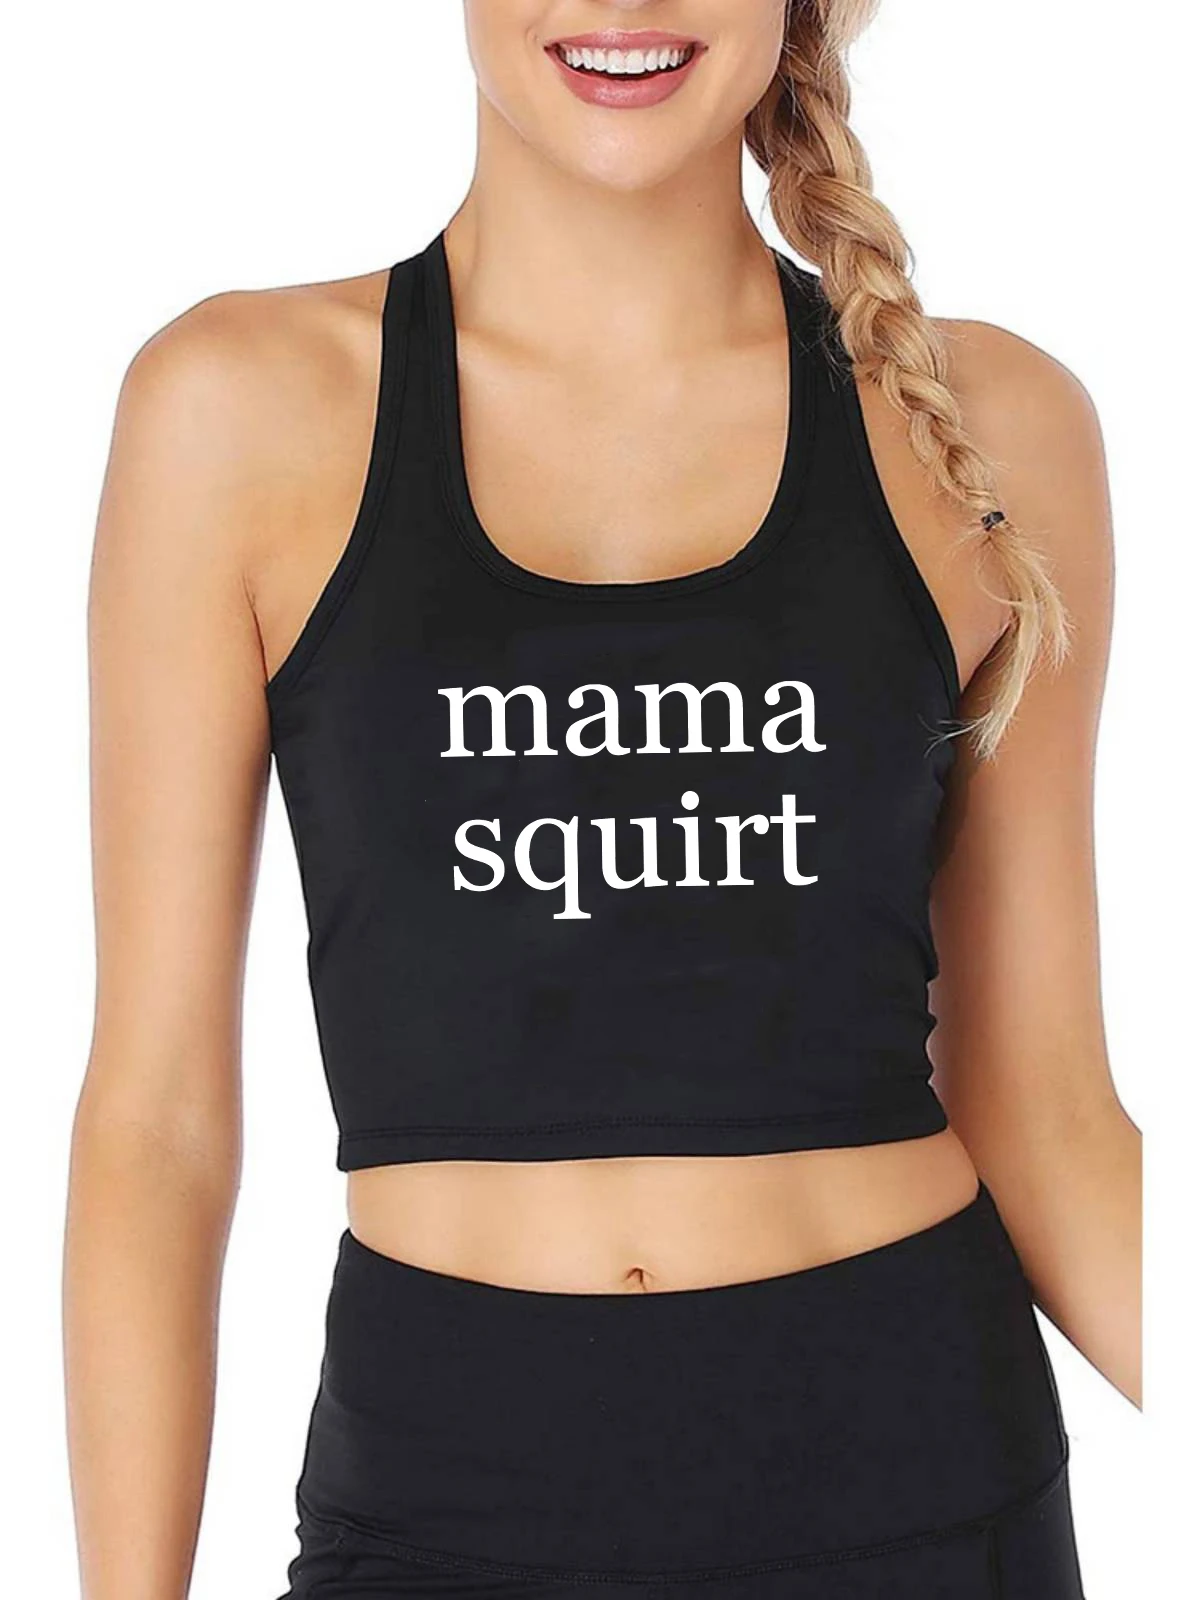 

Mama Squirt Funny Gift Crop Top Hotwife Humorous Flirtation Sexy Slim Fit Tank Tops Swinger Cotton Breathable Naughty Camisole